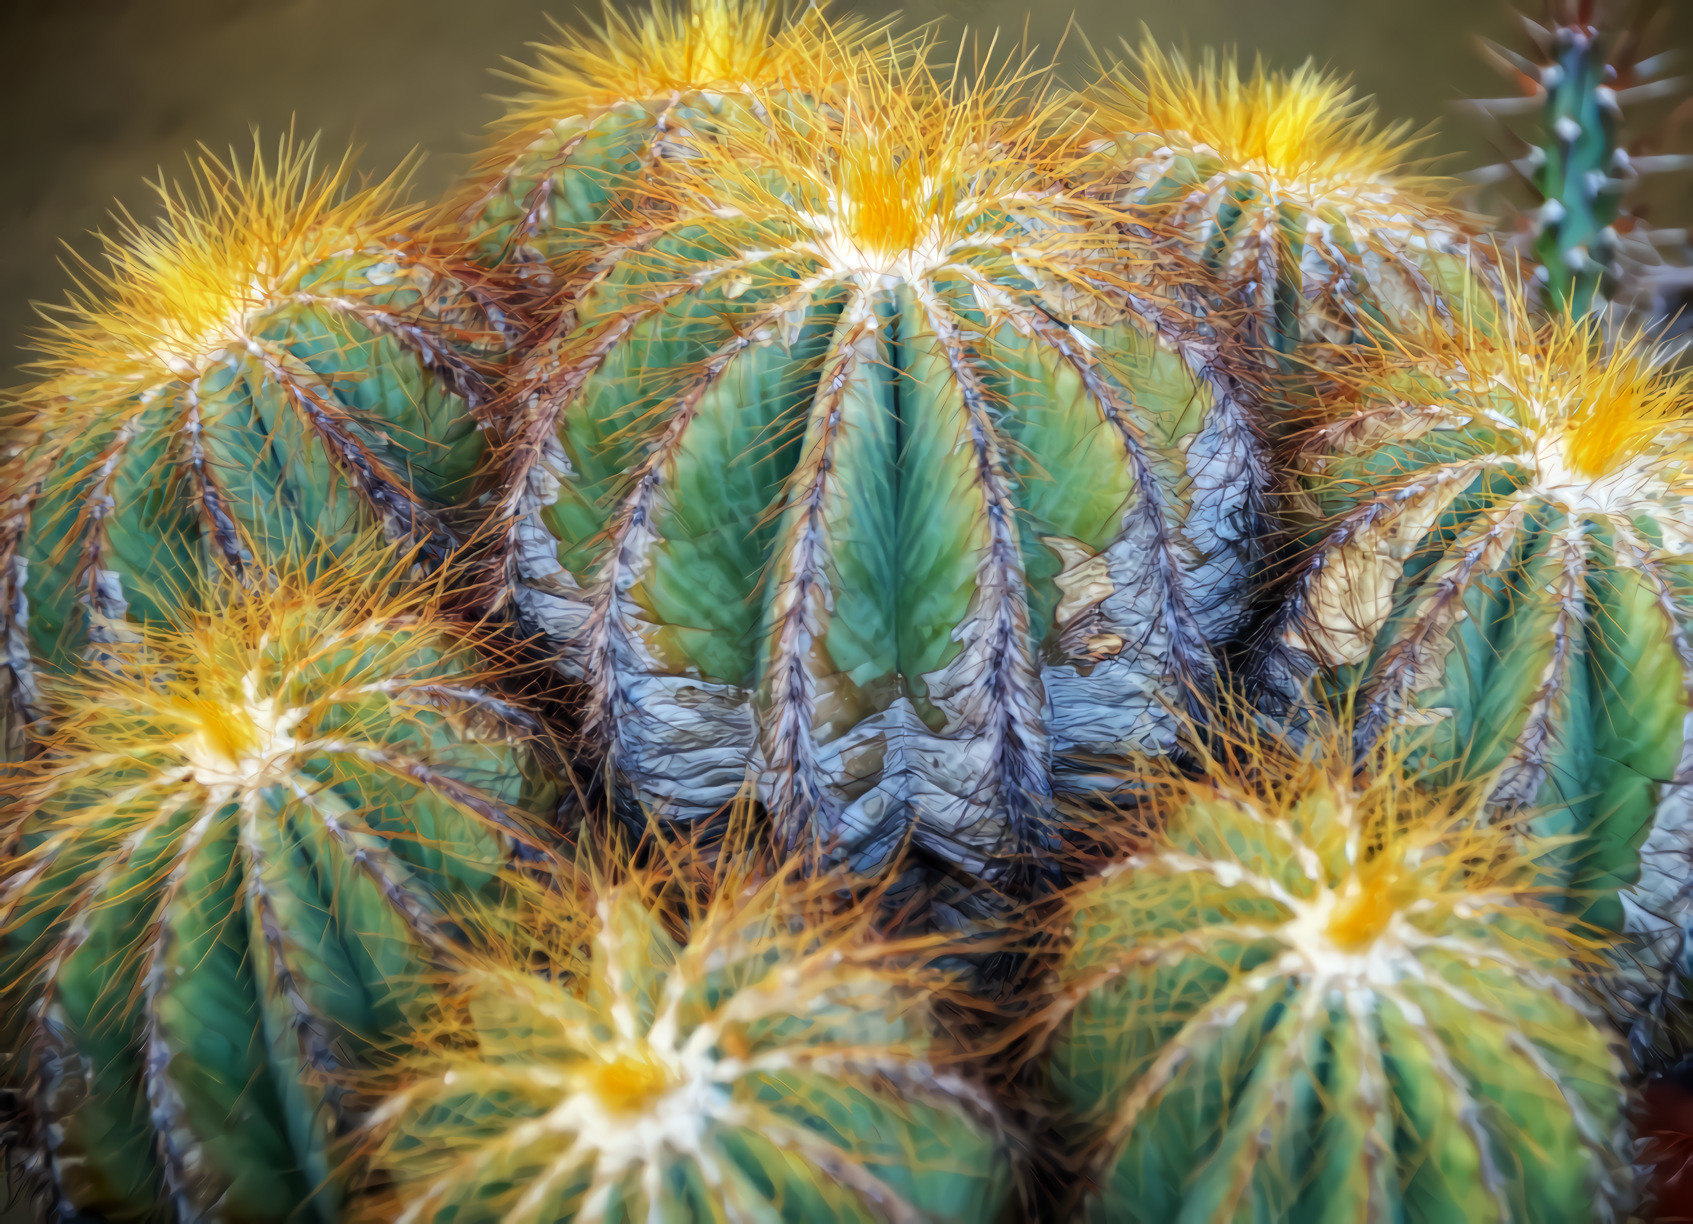 Cactus, Thermophilic Thorns, Thistles